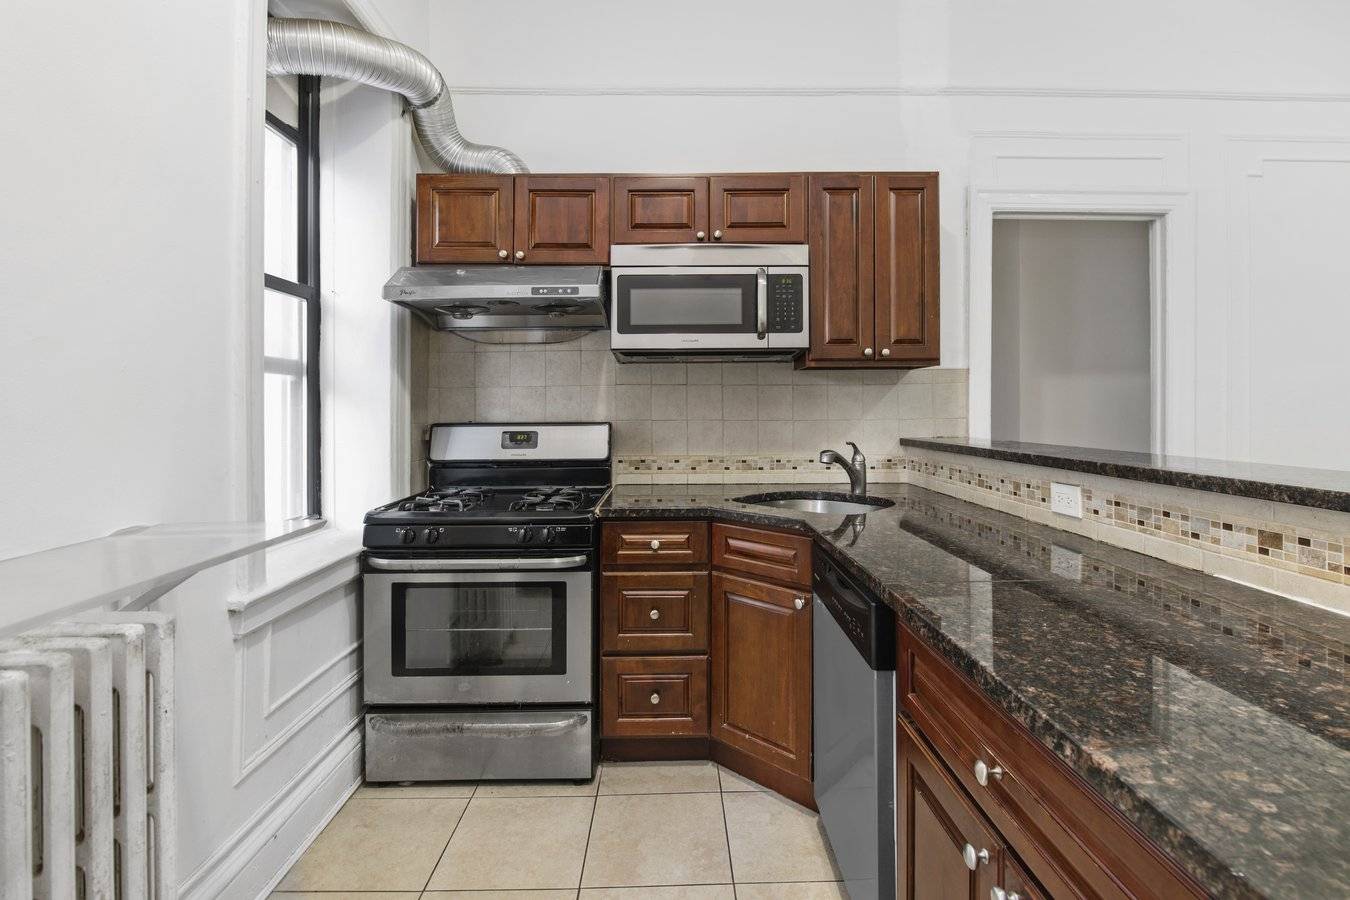 Rarely available 2 bedroom in prime Bay Ridge location.